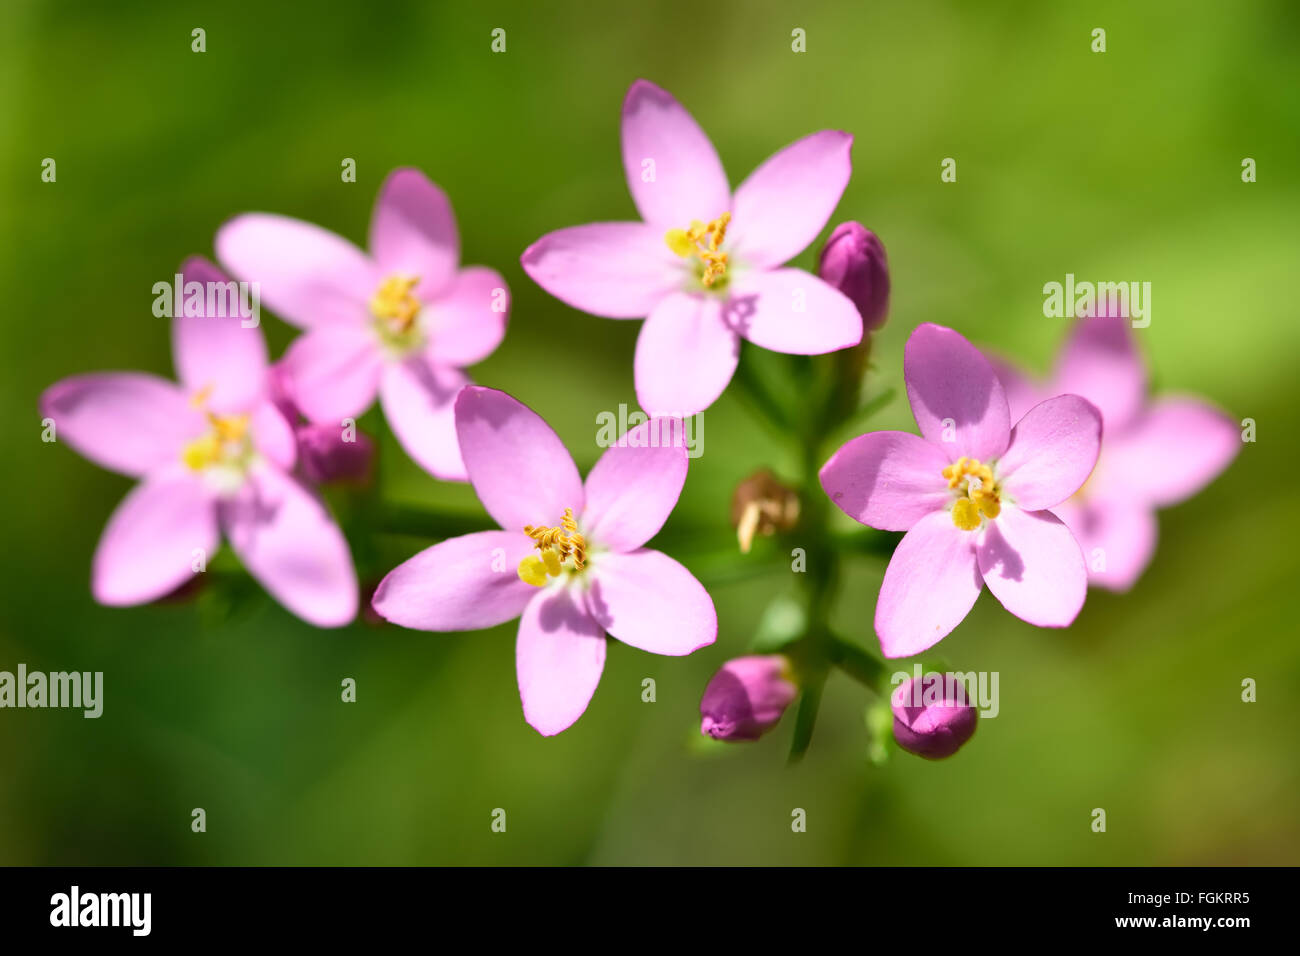 Common centaury (Centaurium erythraea) in flower. Delicate pink flowers on a plant growing in a limestone quarry Stock Photo